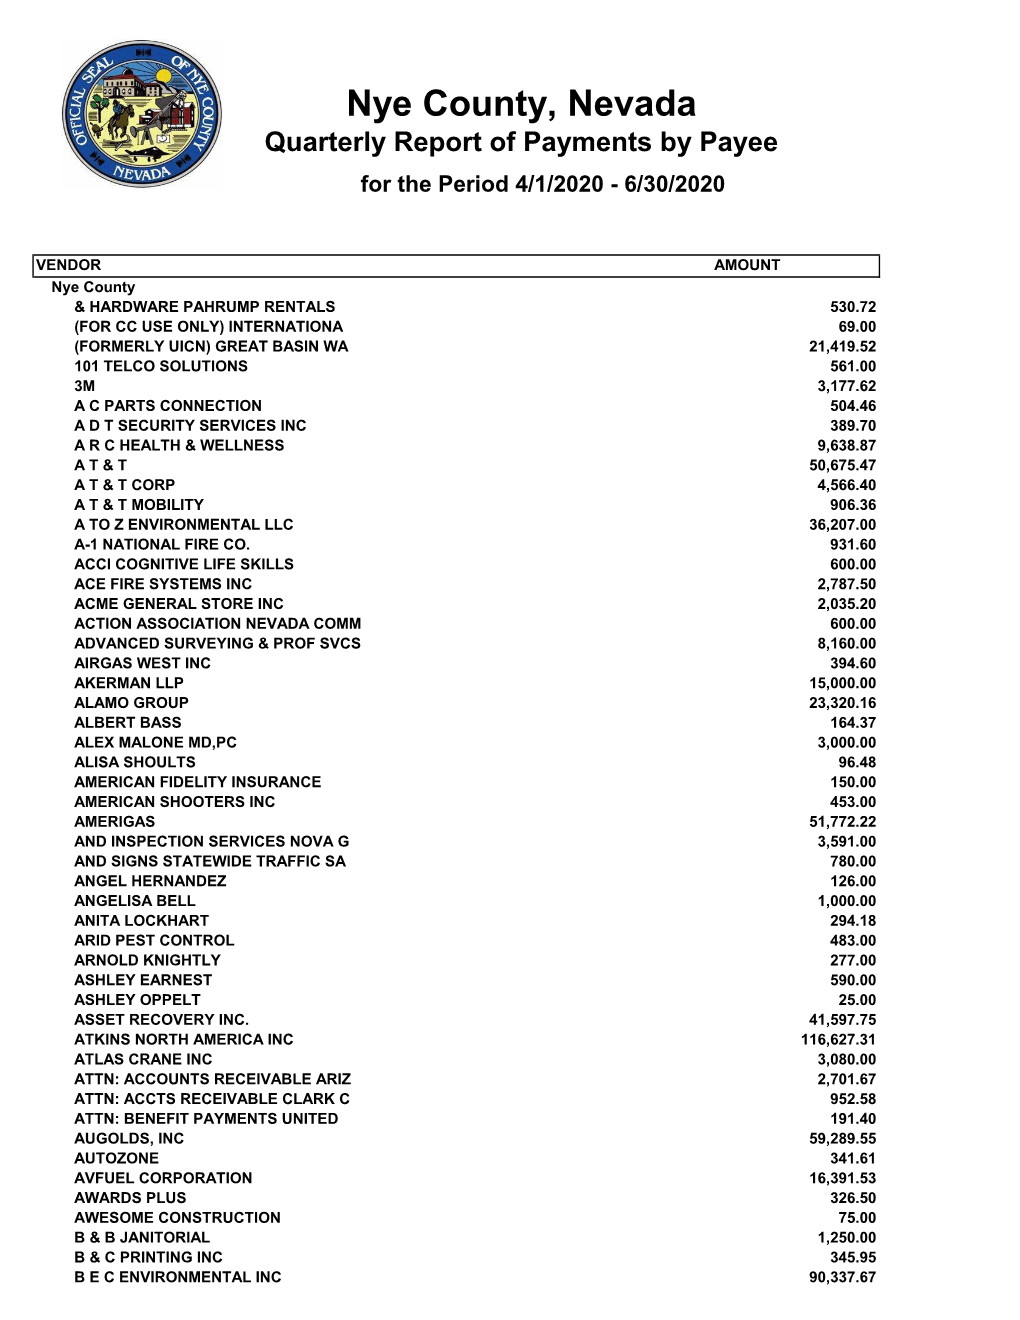 Nye County, Nevada Quarterly Report of Payments by Payee for the Period 4/1/2020 - 6/30/2020